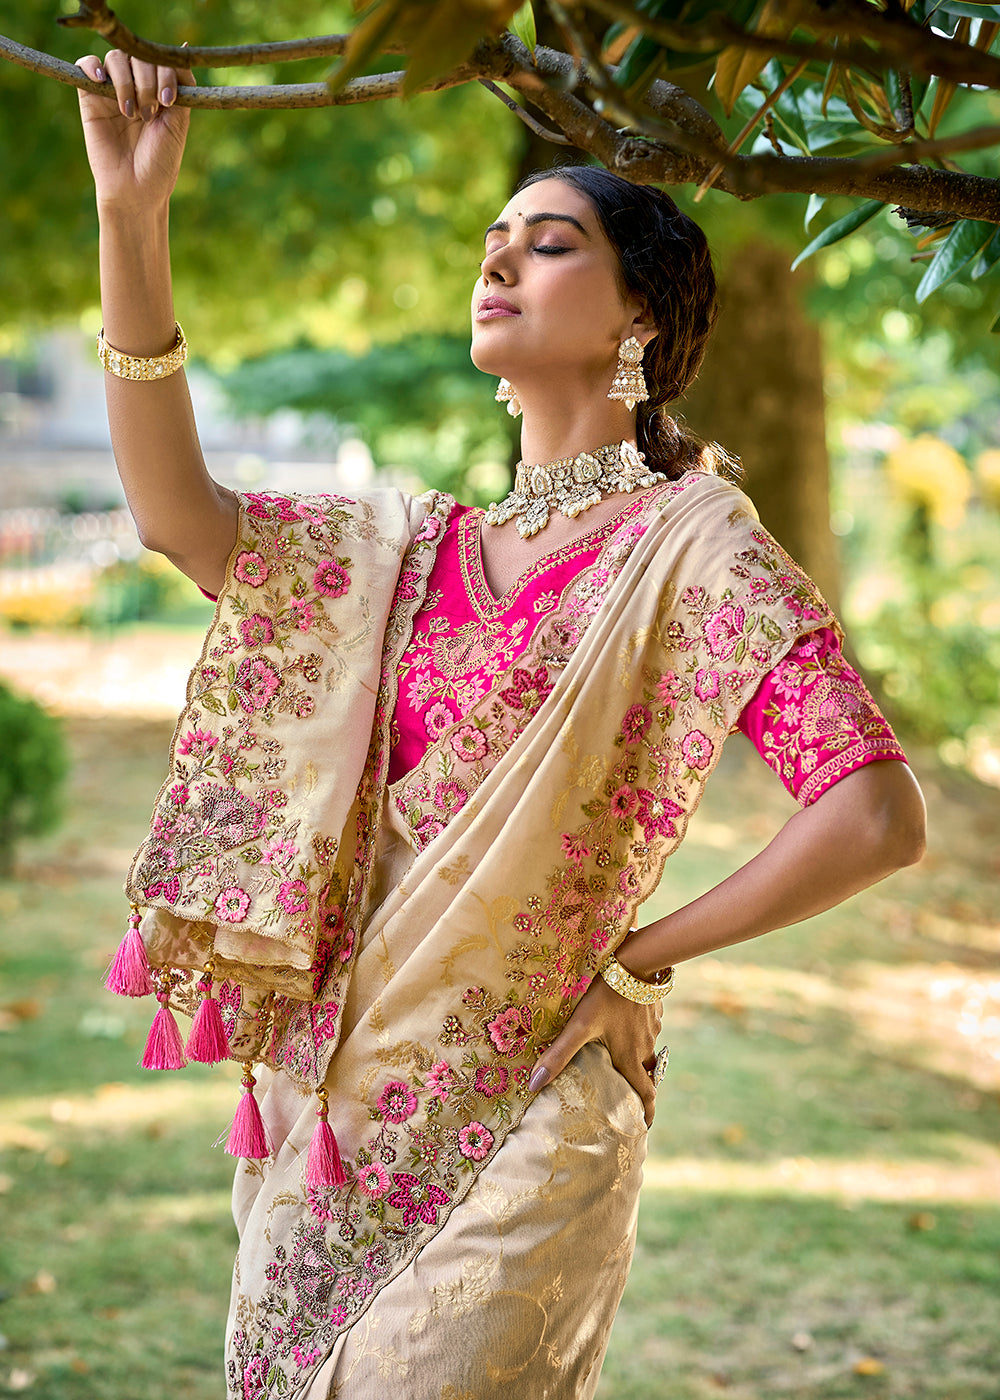 Buy Now Vibrant Cream Embroidered Silk Wedding Wear Contemporary Saree Online in USA, UK, Canada & Worldwide at Empress Clothing. 